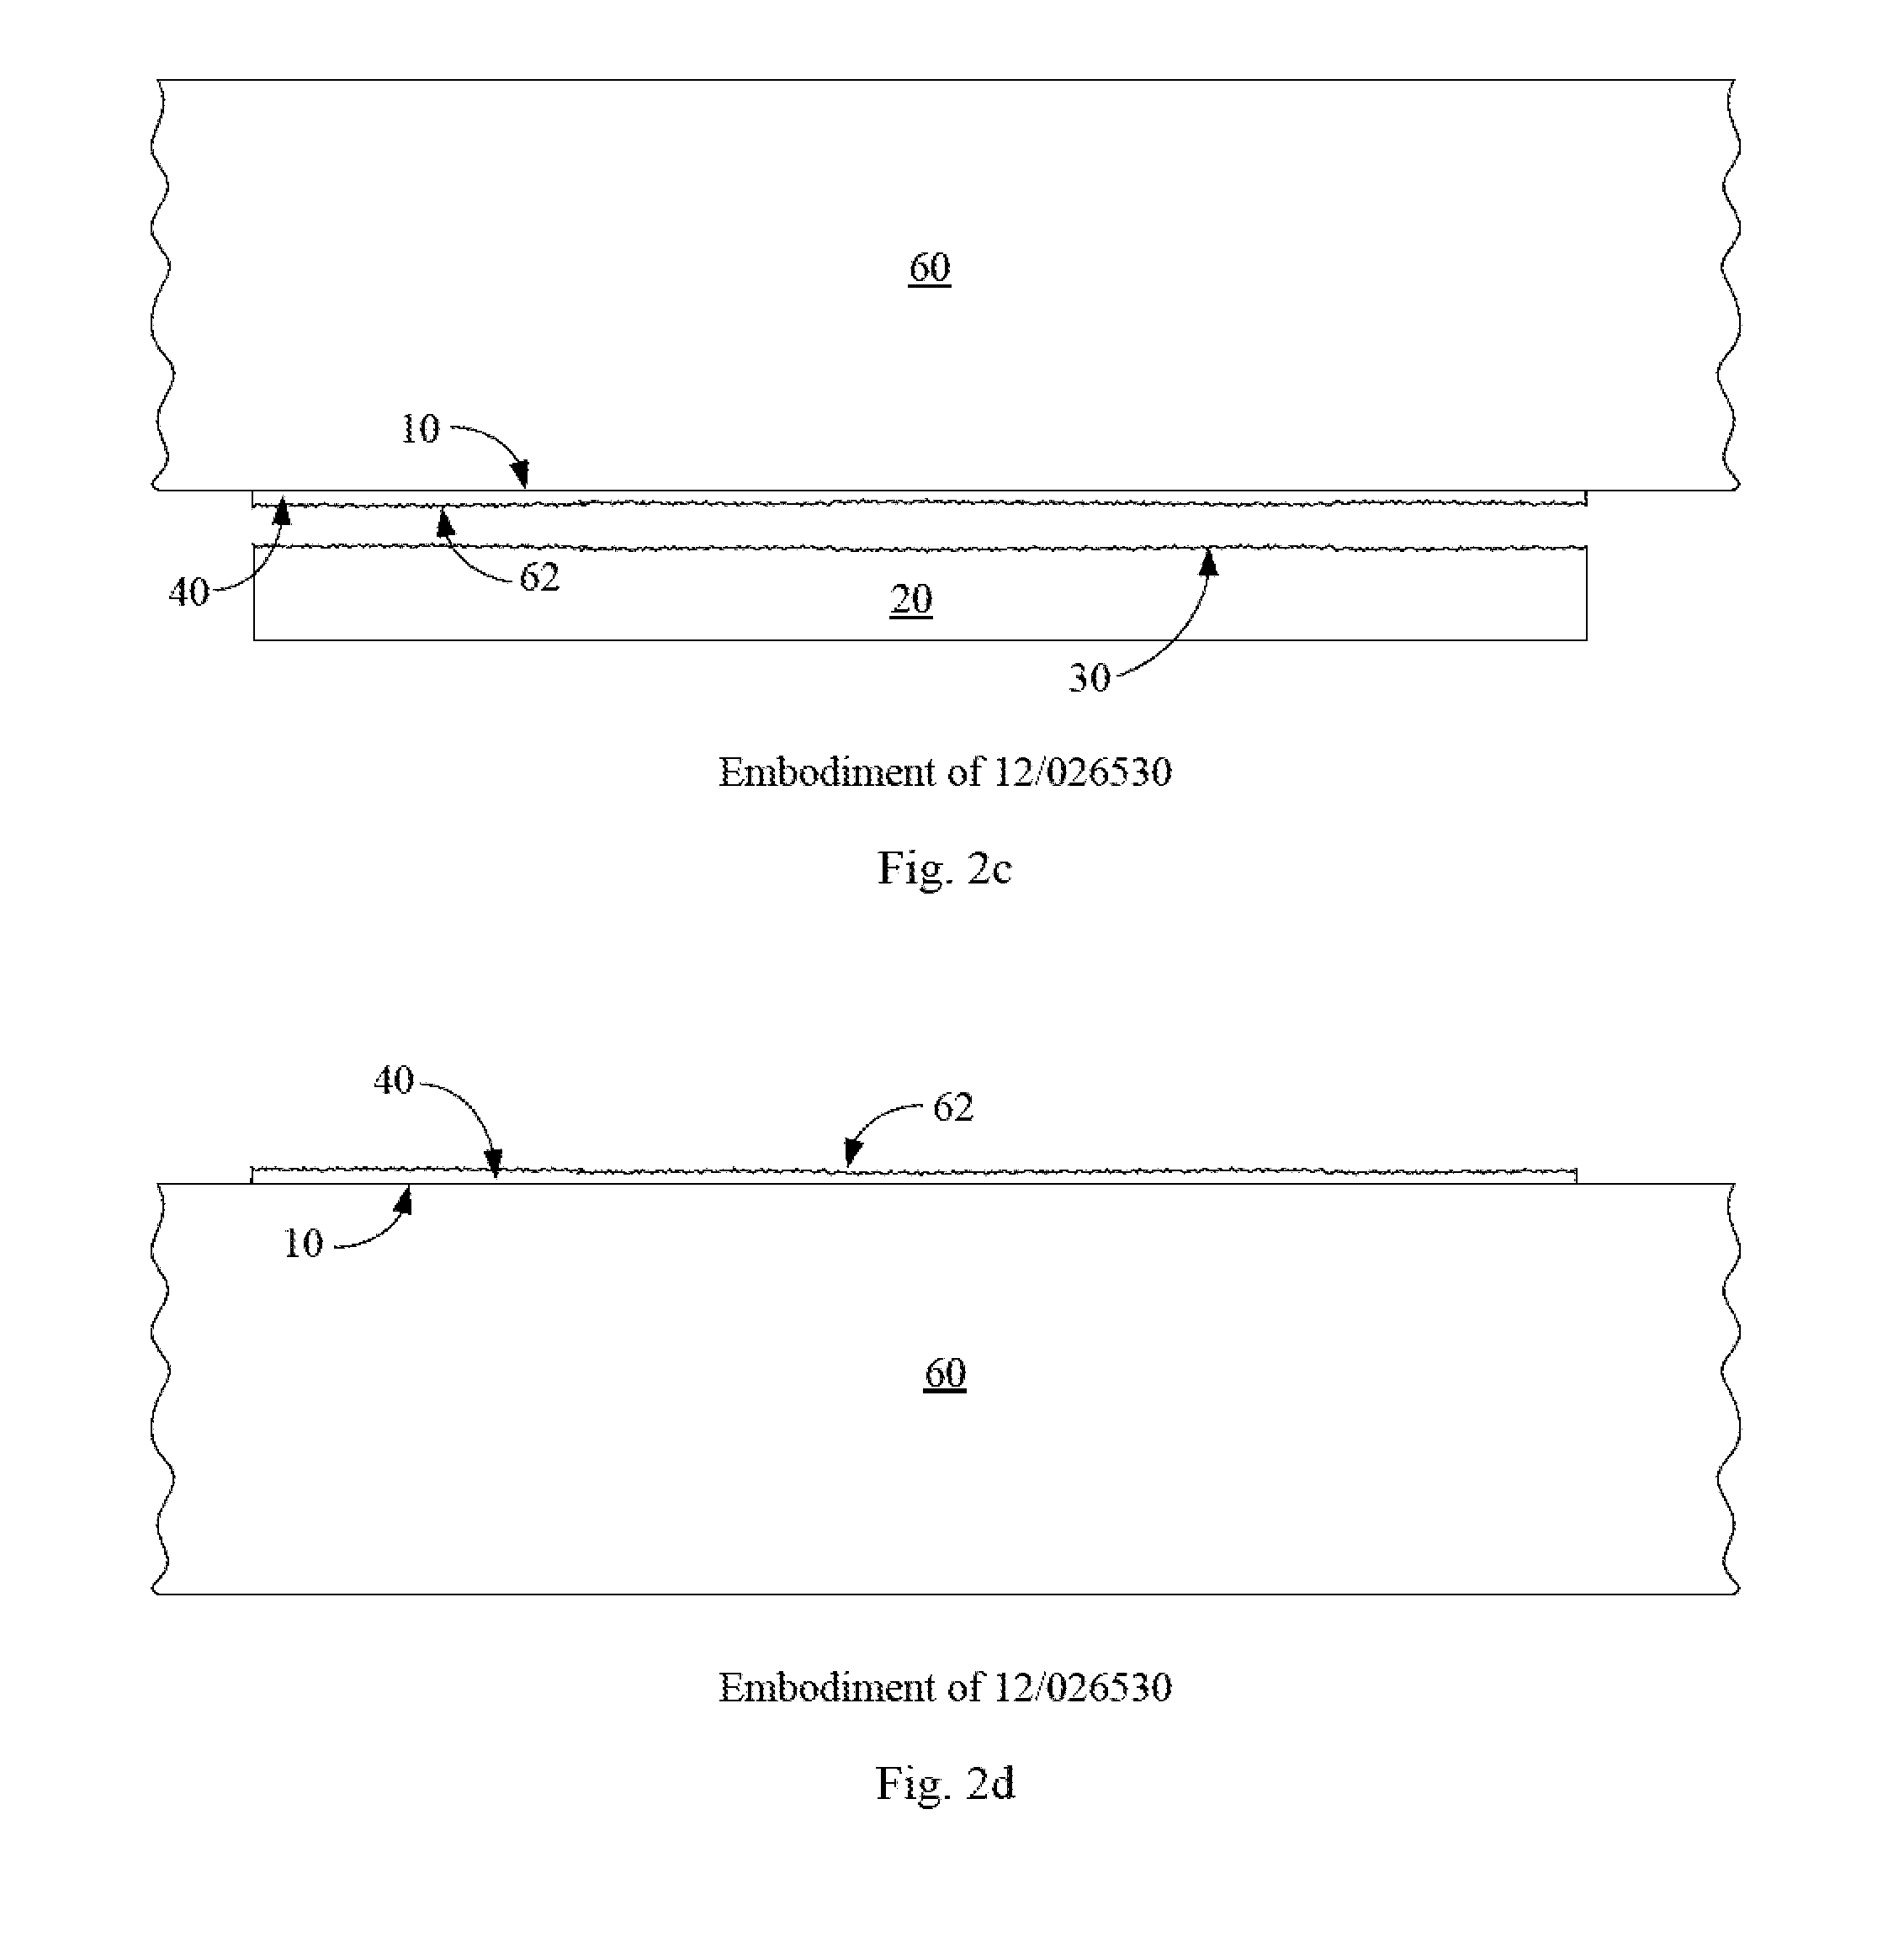 Microwave anneal of a thin lamina for use in a photovoltaic cell